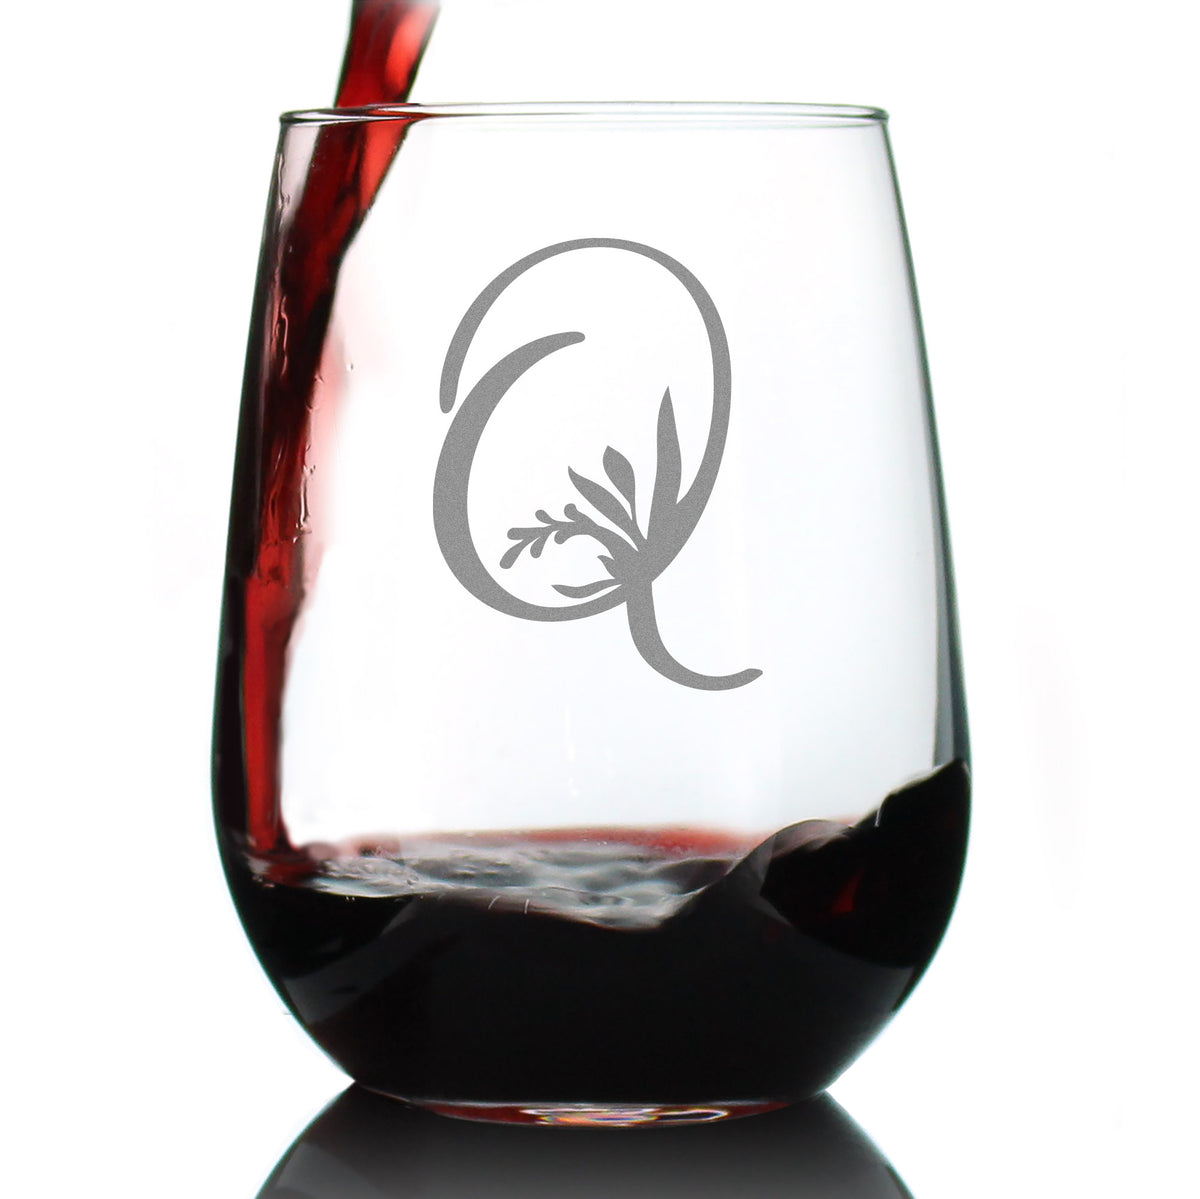 Monogram Floral Letter Q - Stemless Wine Glass - Personalized Gifts for Women and Men - Large Engraved 17 Oz Glasses